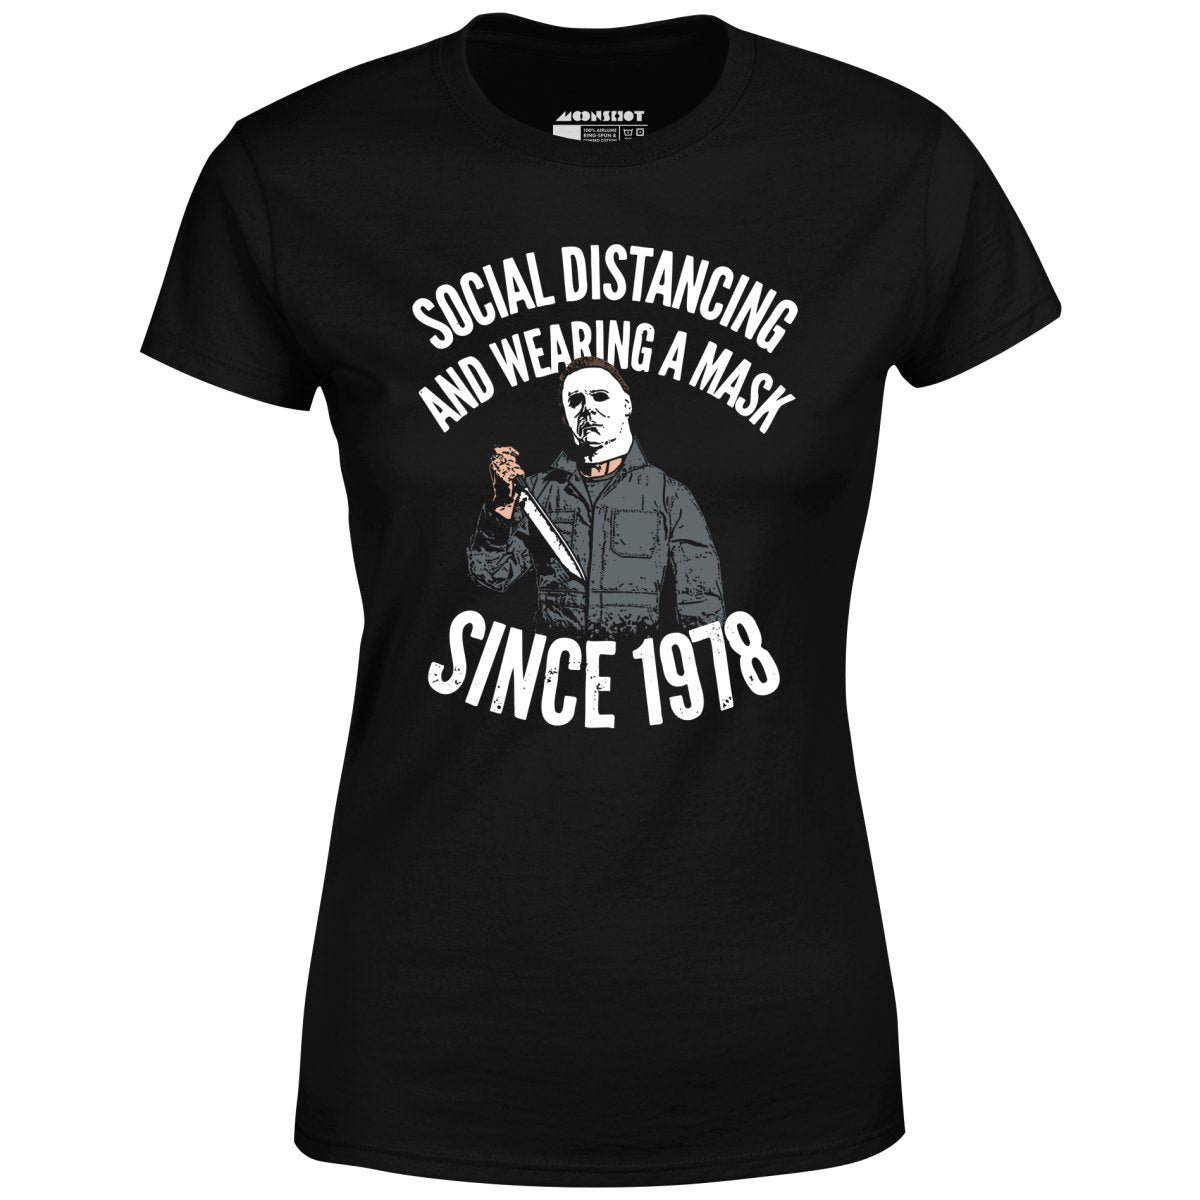 Social Distancing and Wearing a Mask Since 1978 - Women's T-Shirt